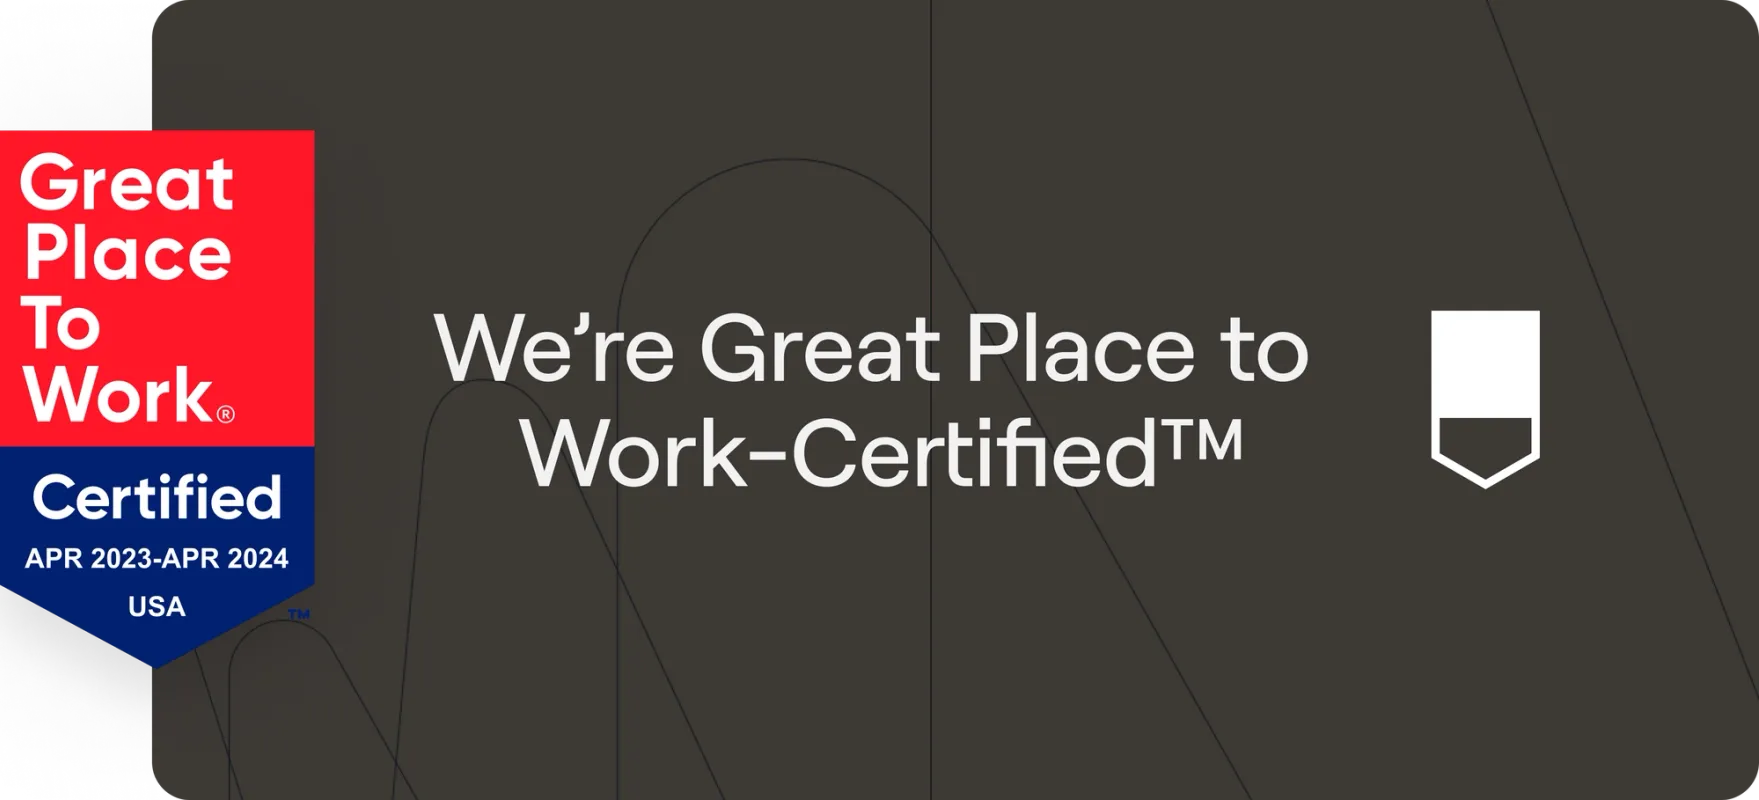 We're Great Place to Work-Certified. April 2023 - April 2024